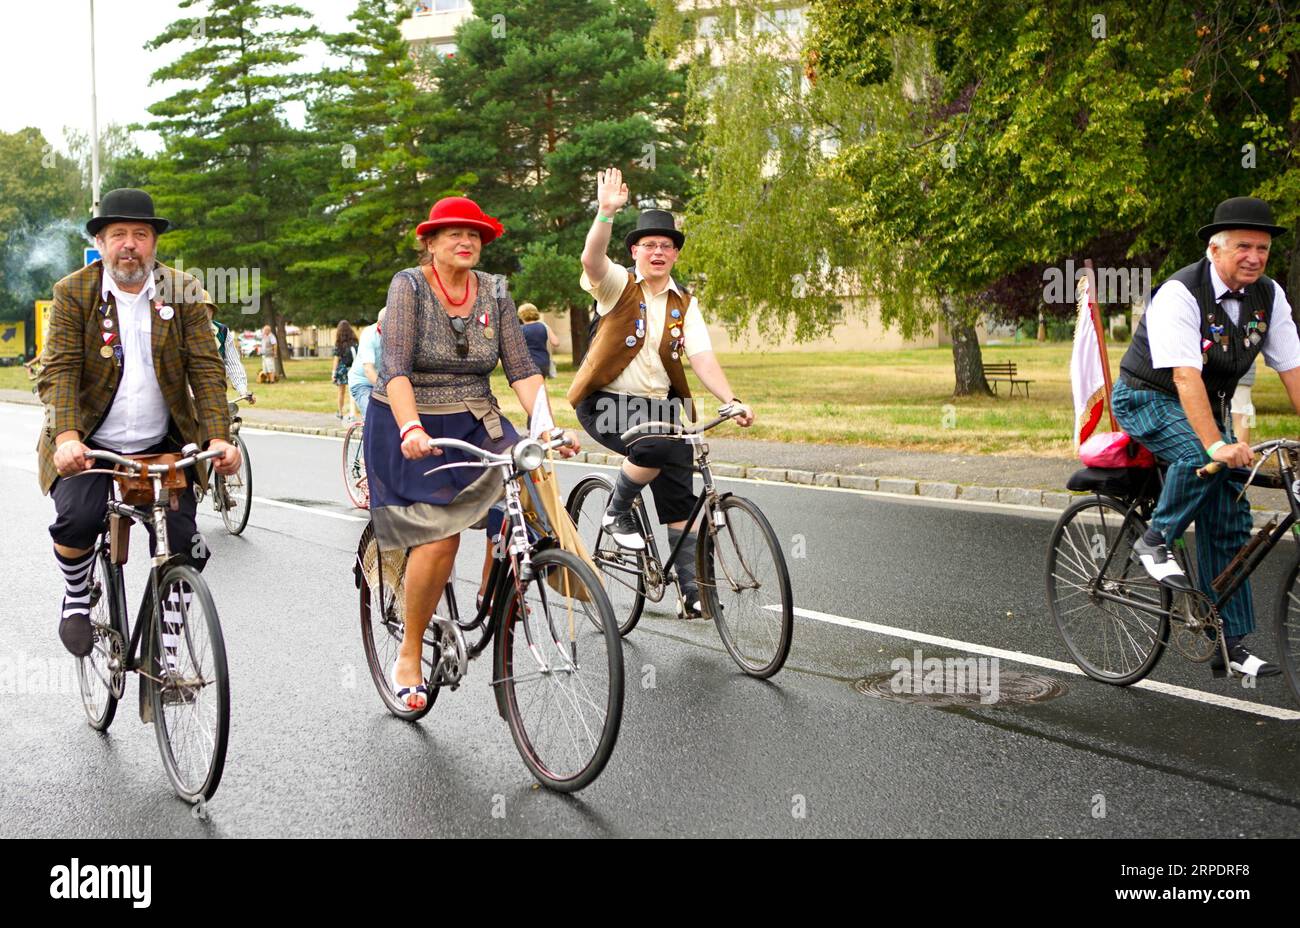 (190810) -- PRAGUE, Aug. 10, 2019 (Xinhua) -- Cyclists take part in a commemorative ride in Kutna Hora, the Czech Republic, Aug. 10, 2019. Dozens of cyclists in traditional clothing rode historical bikes and passed through the central Czech city of Kutna Hora on Saturday afternoon to celebrate the 150th anniversary of the first bike race on the Czech land. The first cycling race in Bohemia was said to be held in Kutna Hora on Aug. 8, 1869 on the road between Kutna Hora and Sedlec. (Photo by Dana Kesnerova/Xinhua) CZECH REPUBLIC-KUTNA HORA-BIKE RACE-COMMEMORATION PUBLICATIONxNOTxINxCHN Stock Photo